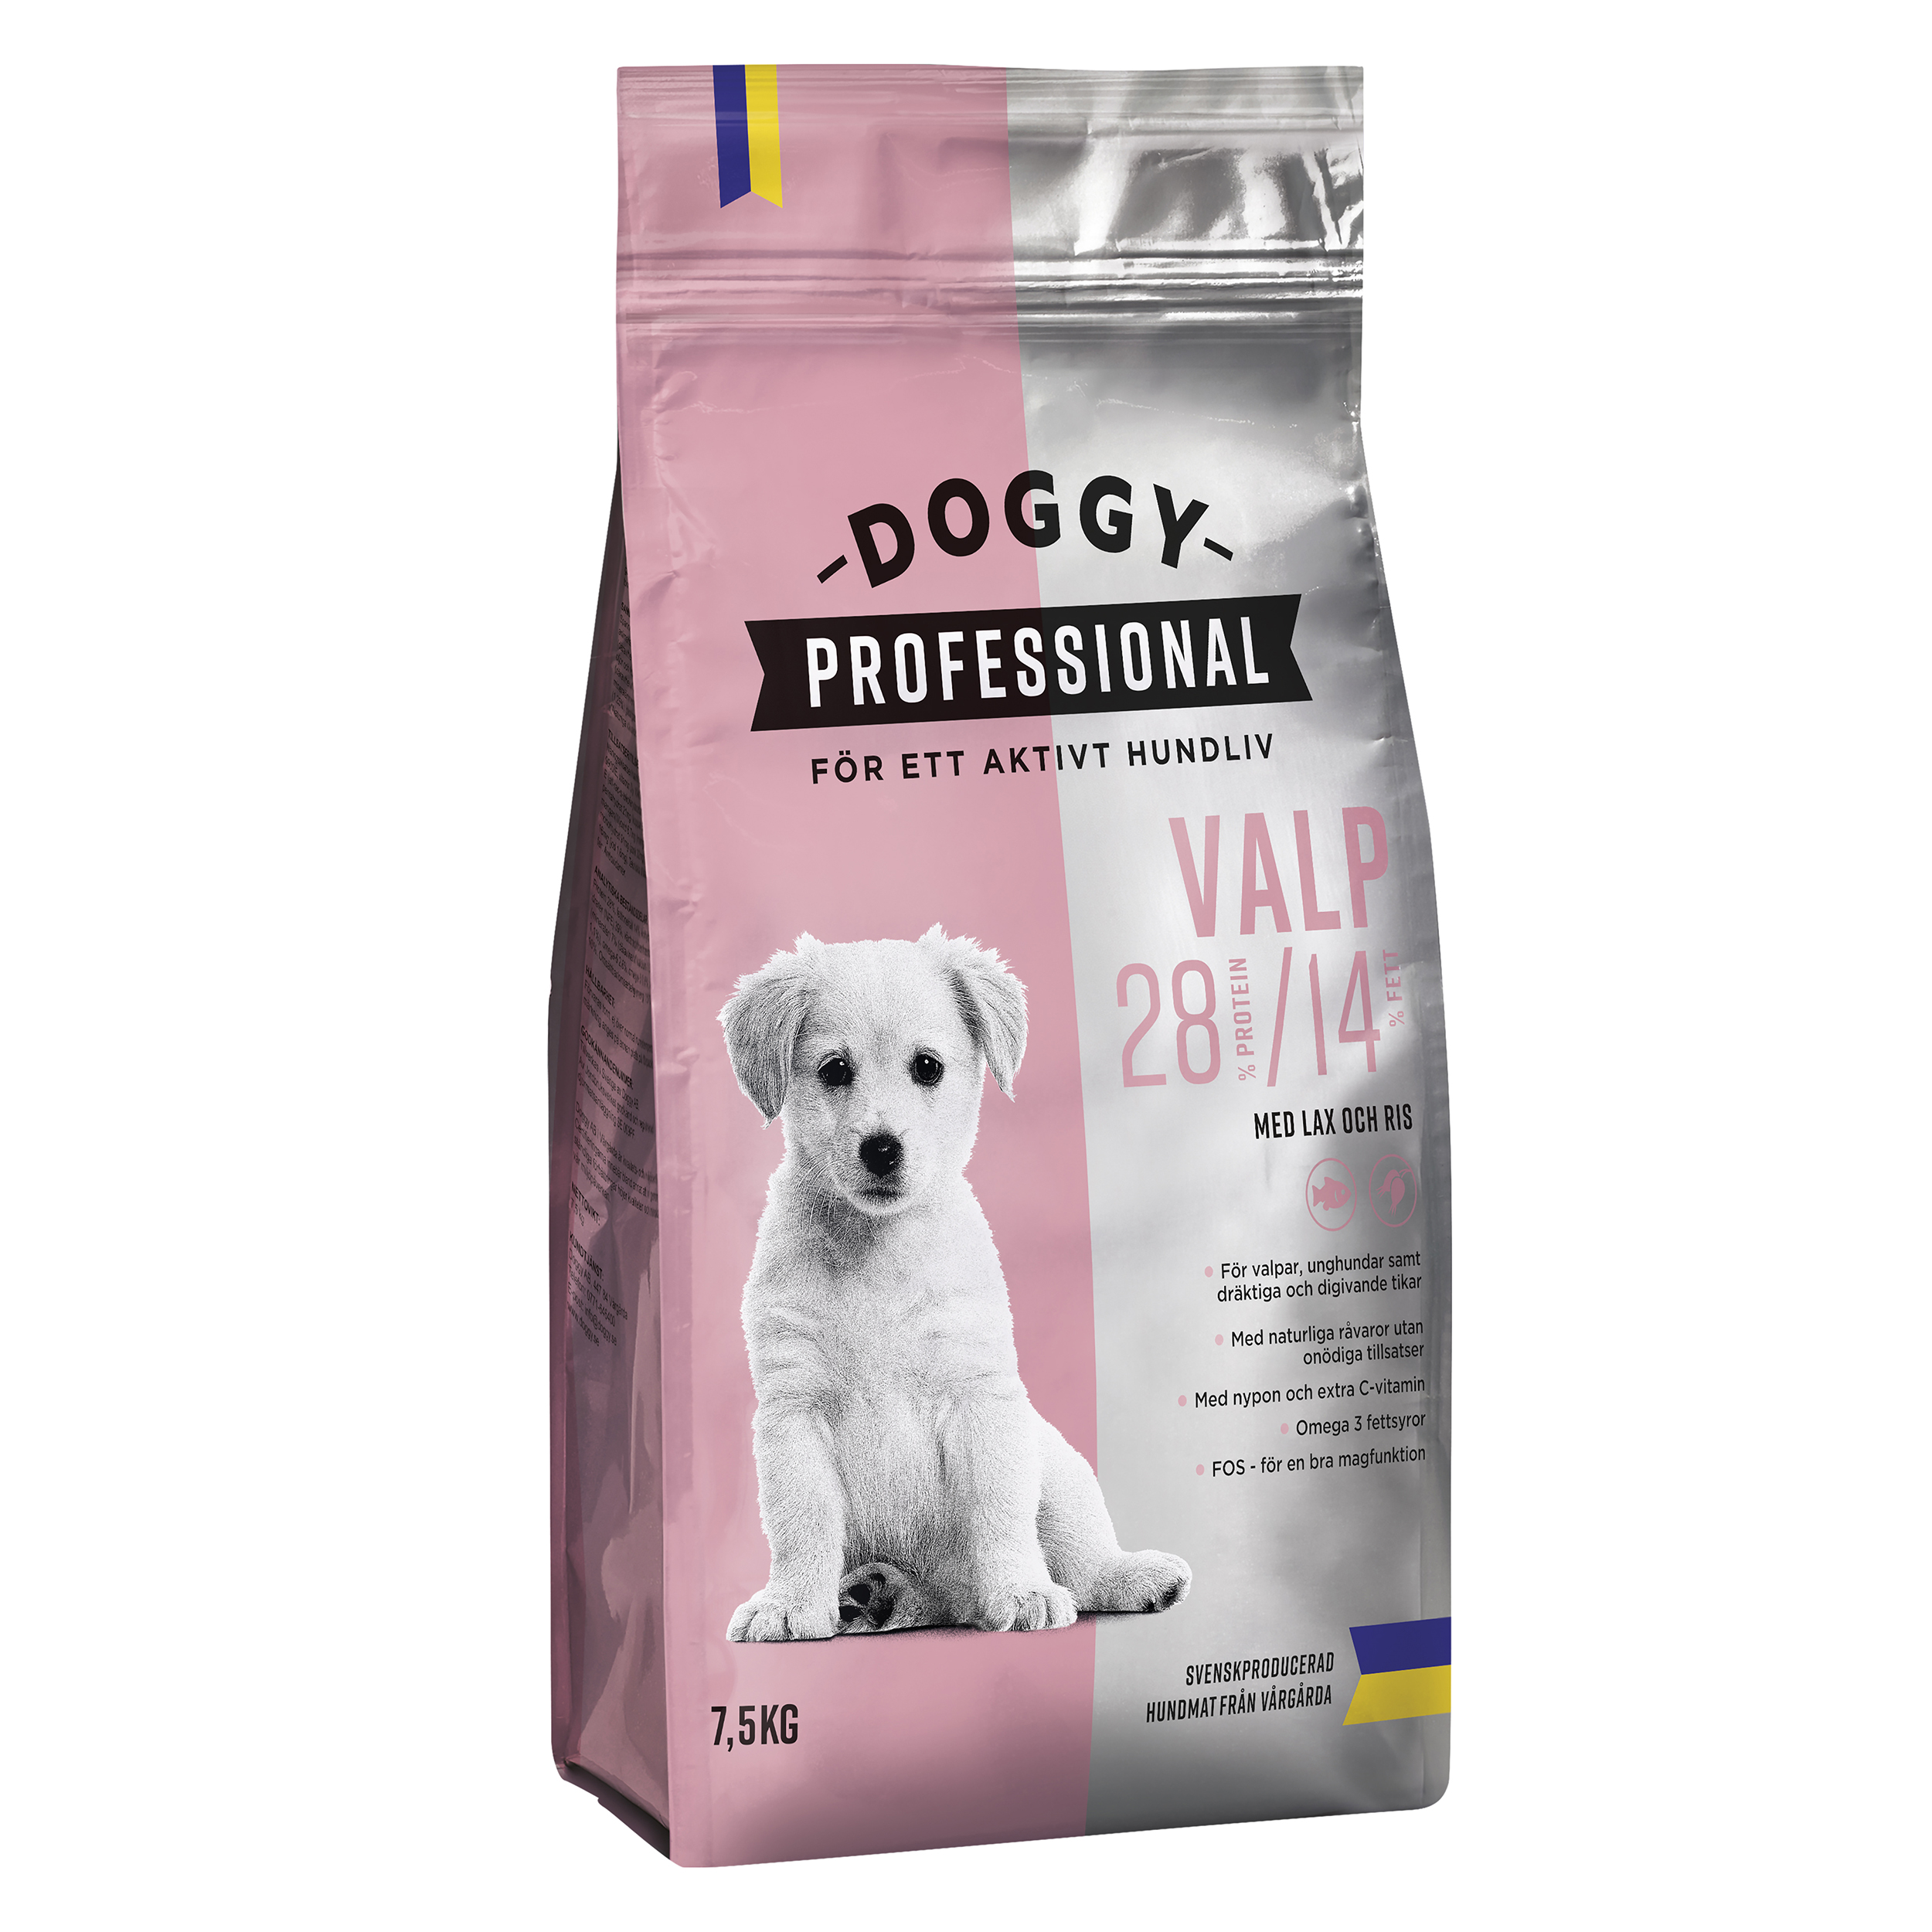 Doggy Professional Extra Valp 7,5kg